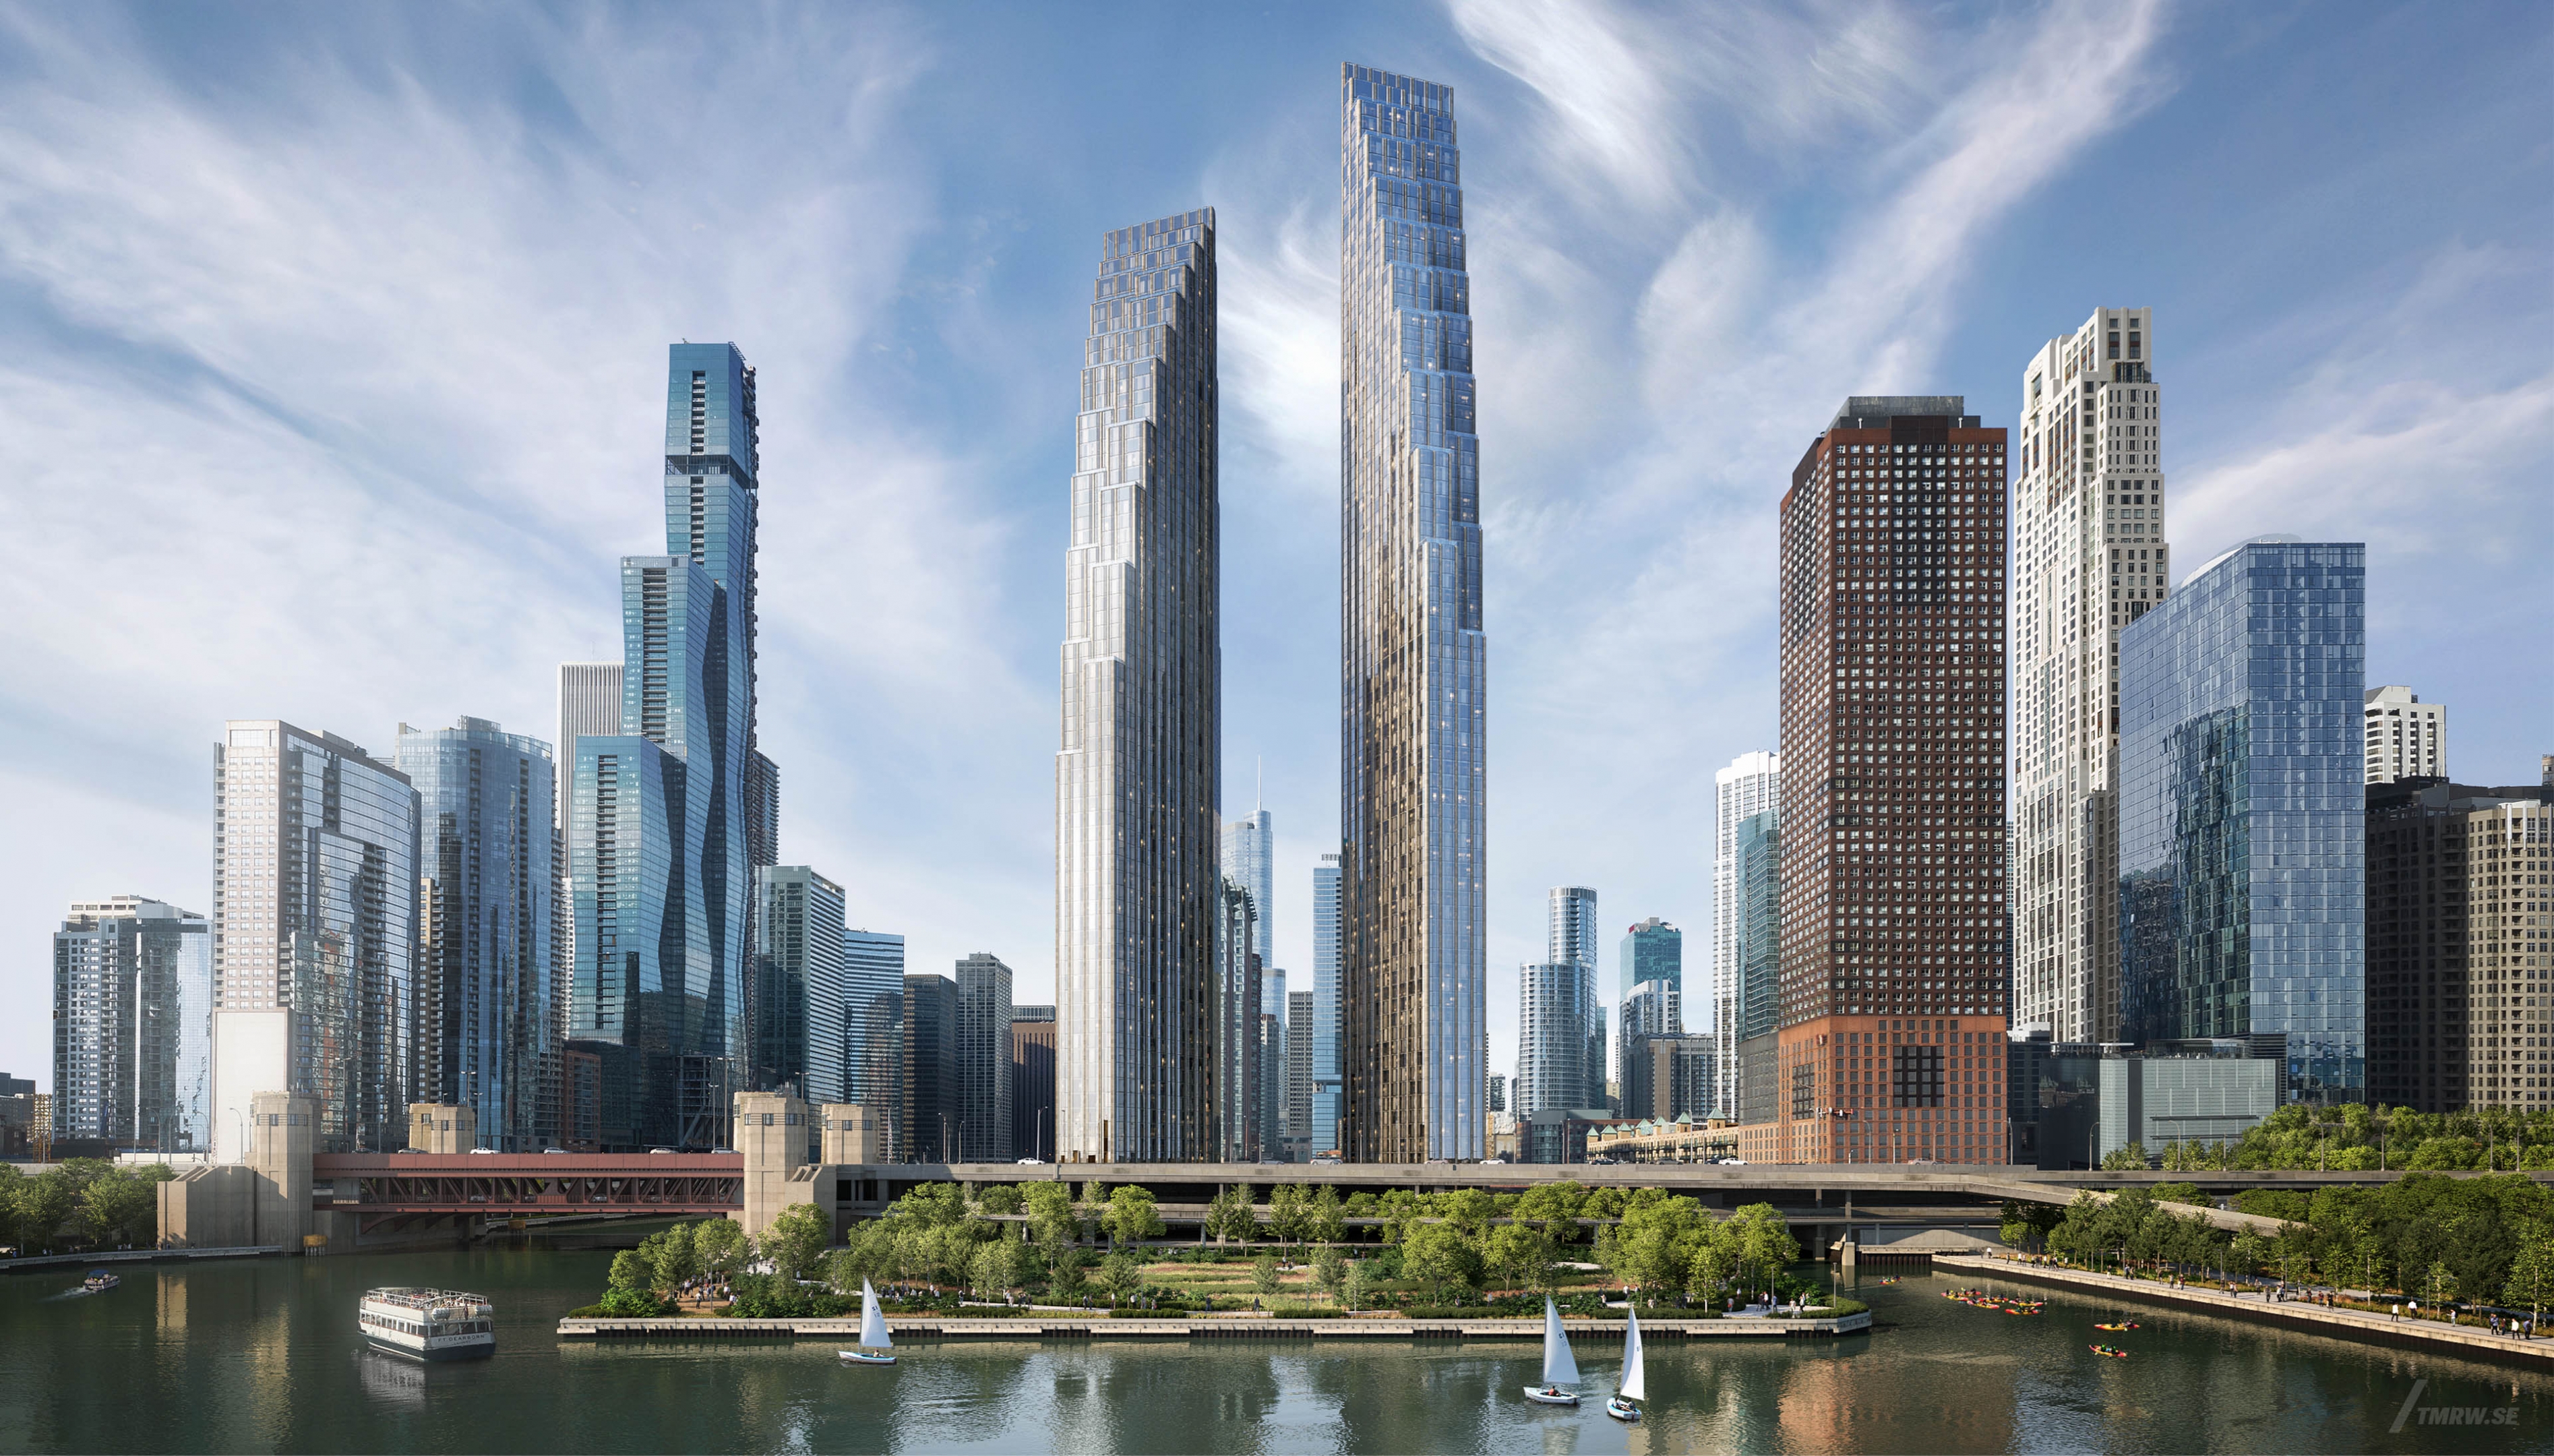 Architectural visualization of 400 Lake Shore Drive for SOM, exterior of a skyscraper in daylight, city view